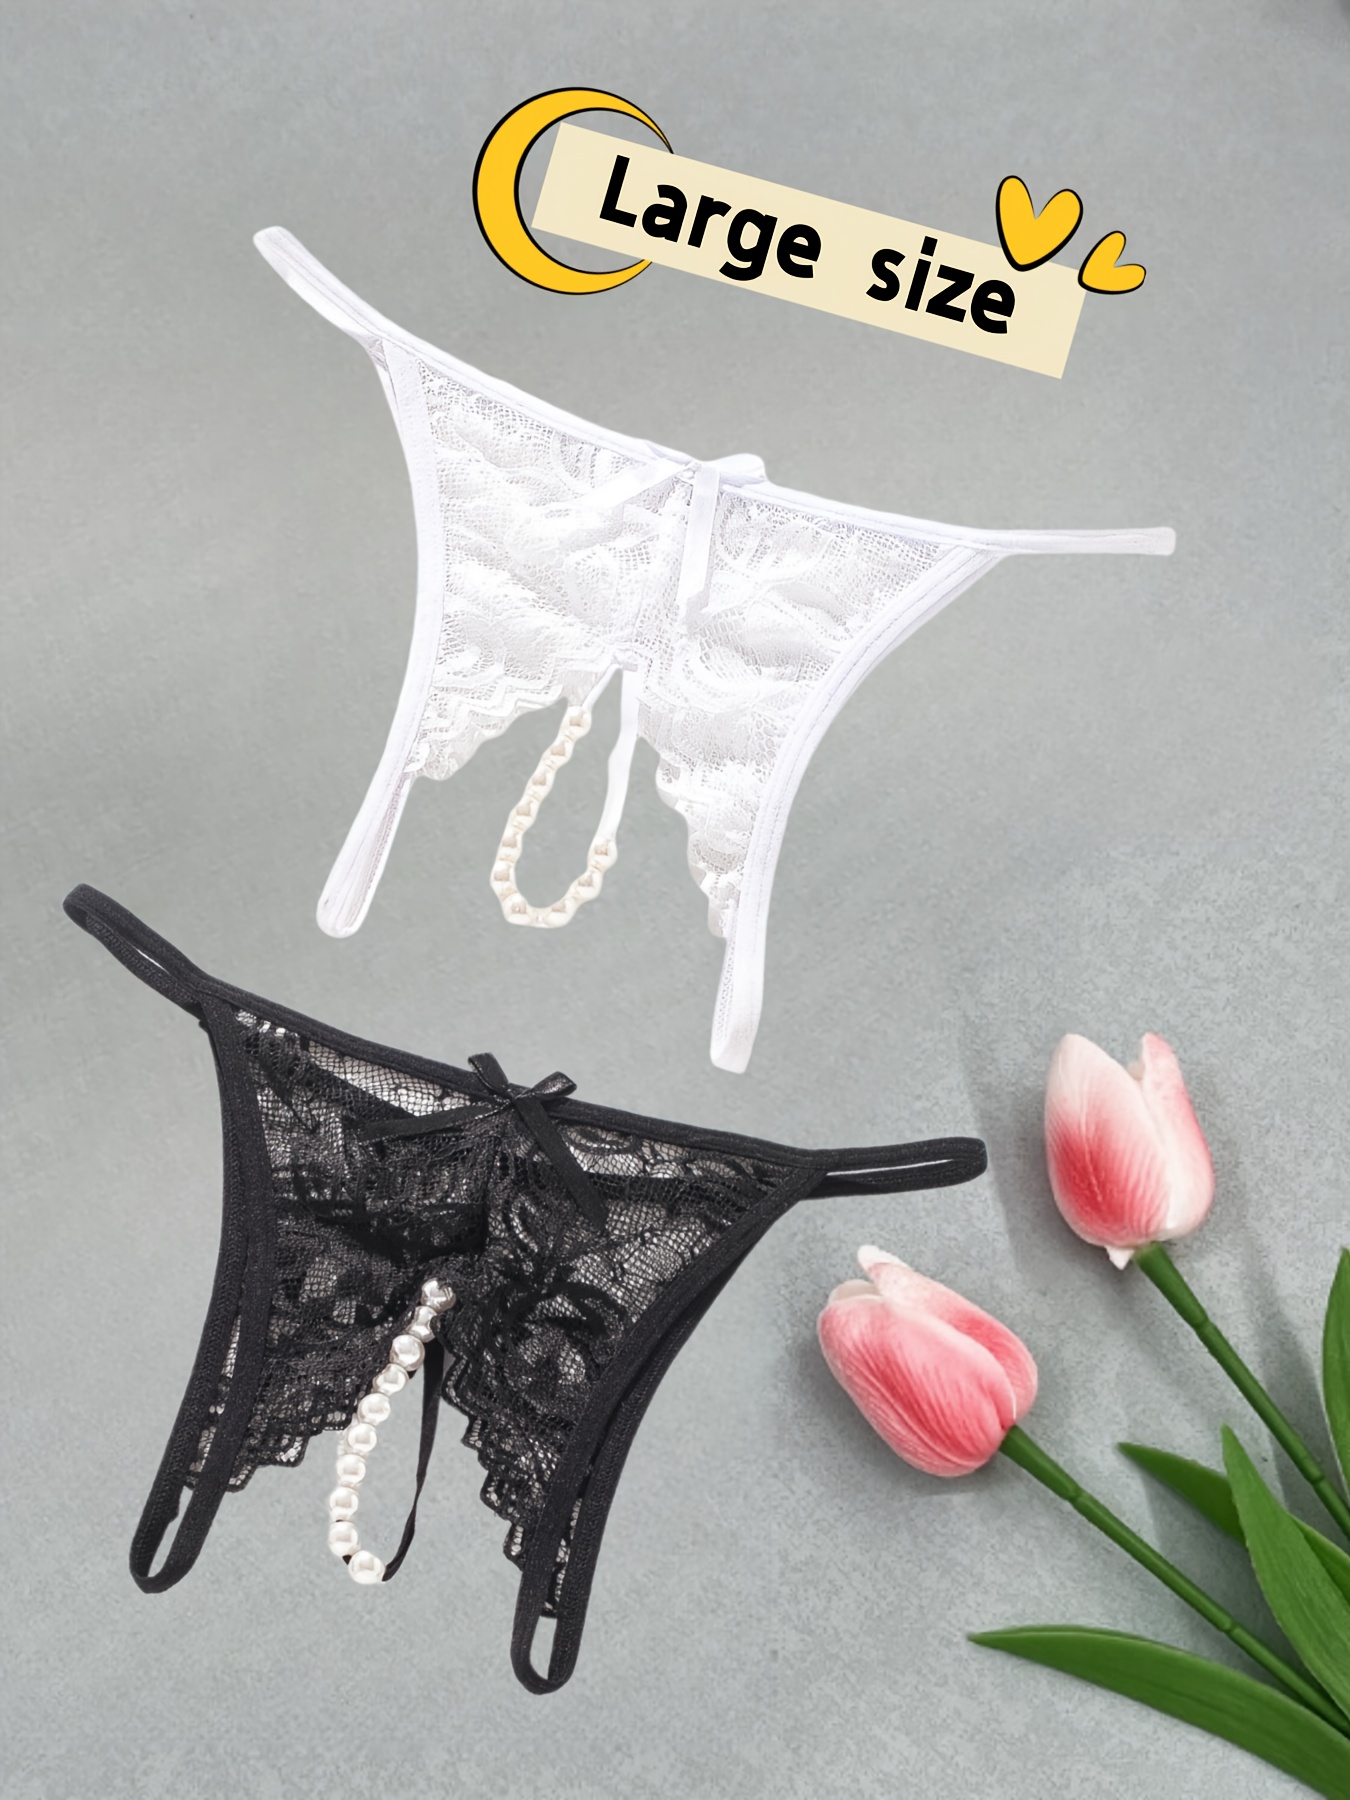 Panties Underwear Fashion Transparent Crotchless Lace Pearl Thong